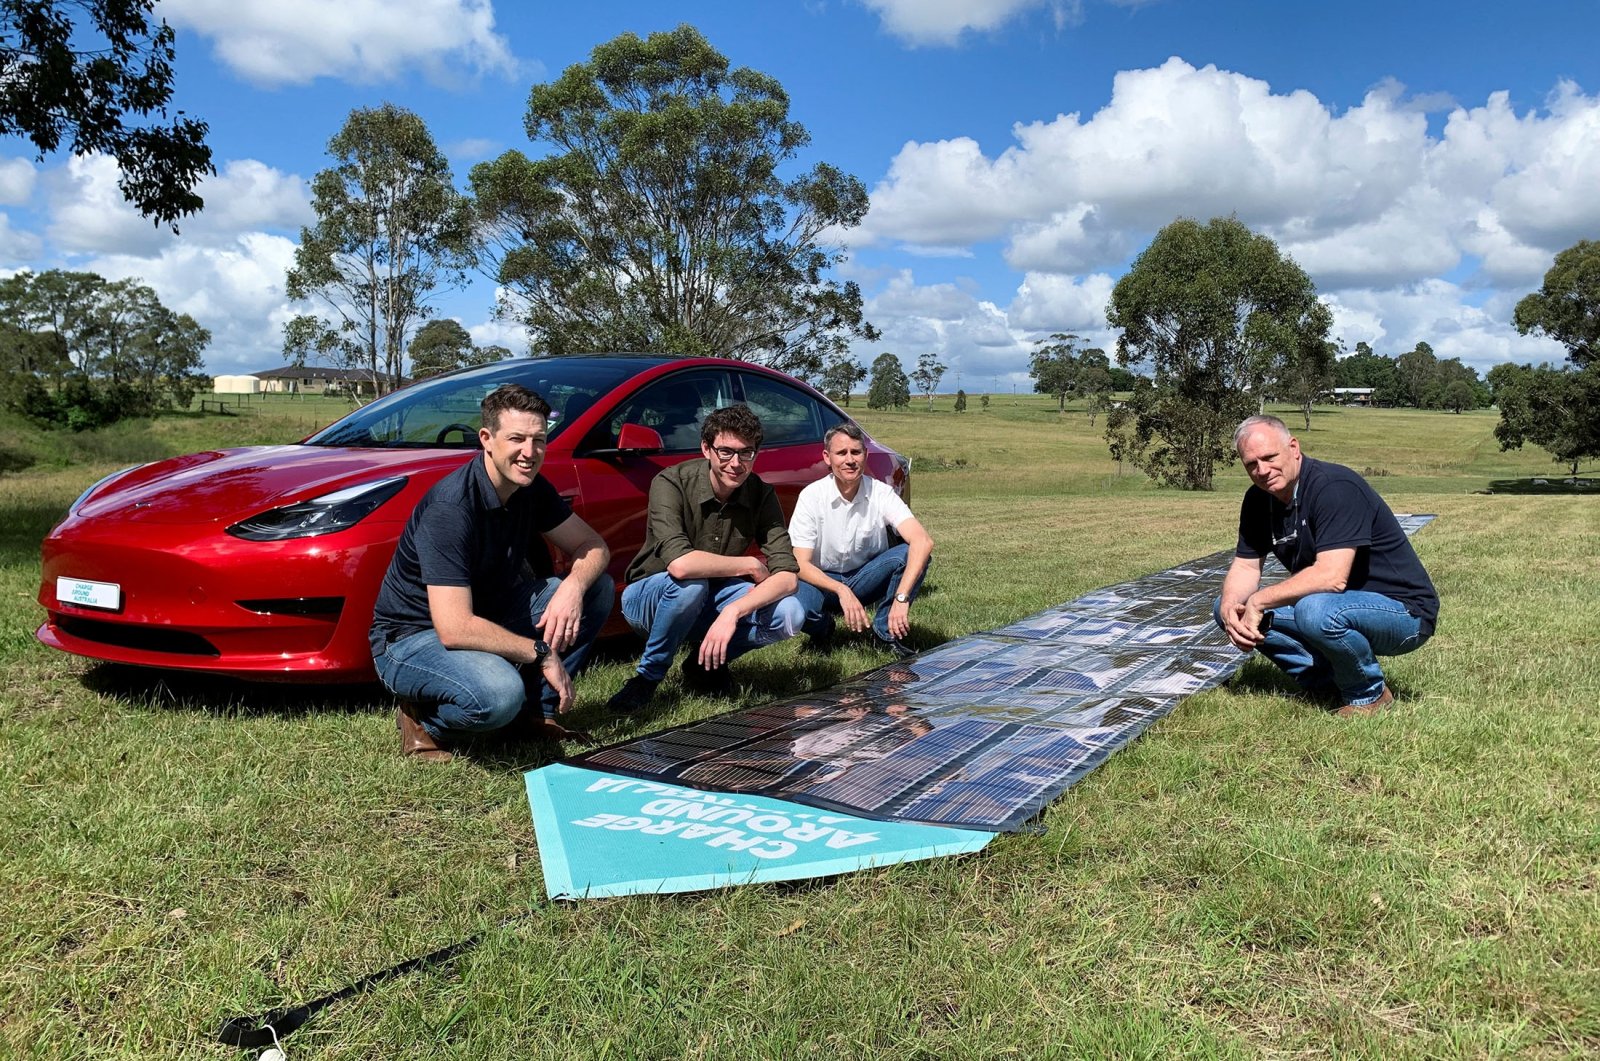 Project manager Ben Vaughan, Matthew Bergin, project lead and inventor Paul Dastoor, and chief designer Michael Dickinson, in Gosforth, NSW, Australia, April 10, 2022. (Reuters Photo)